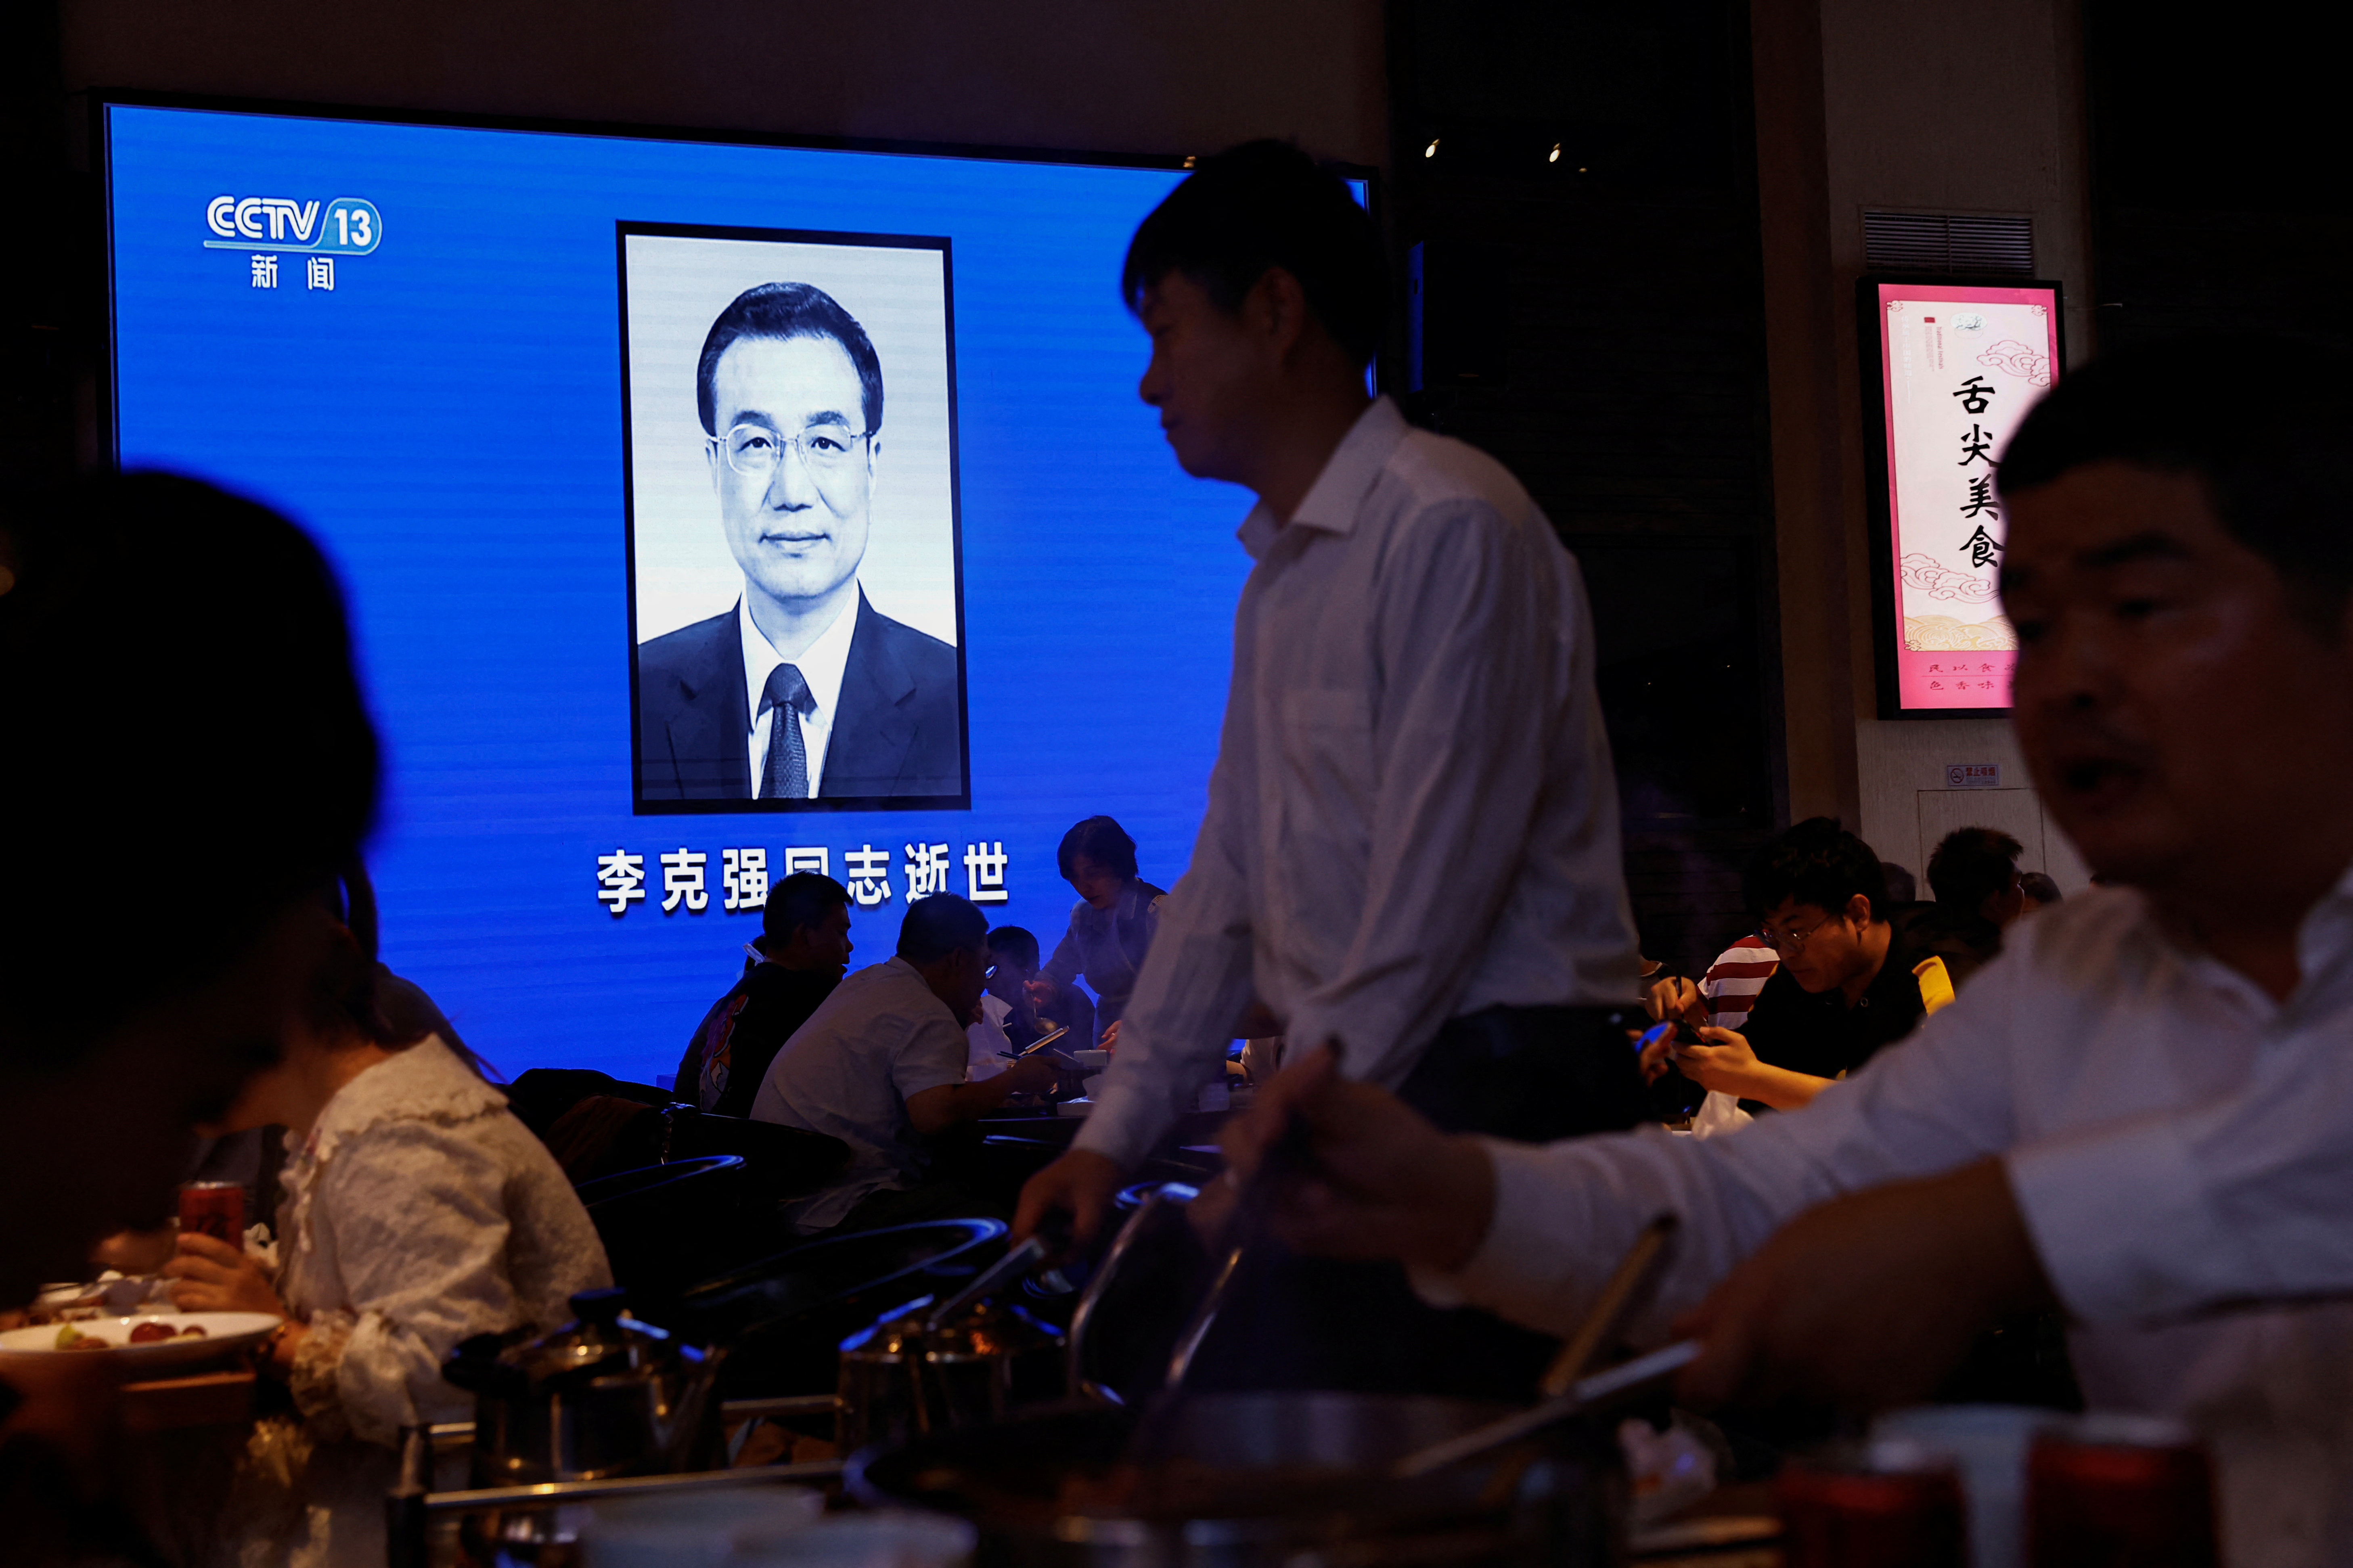 Screen broadcasts obituary of China's former Premier Li during evening news, following his death, at a restaurant in Beijing